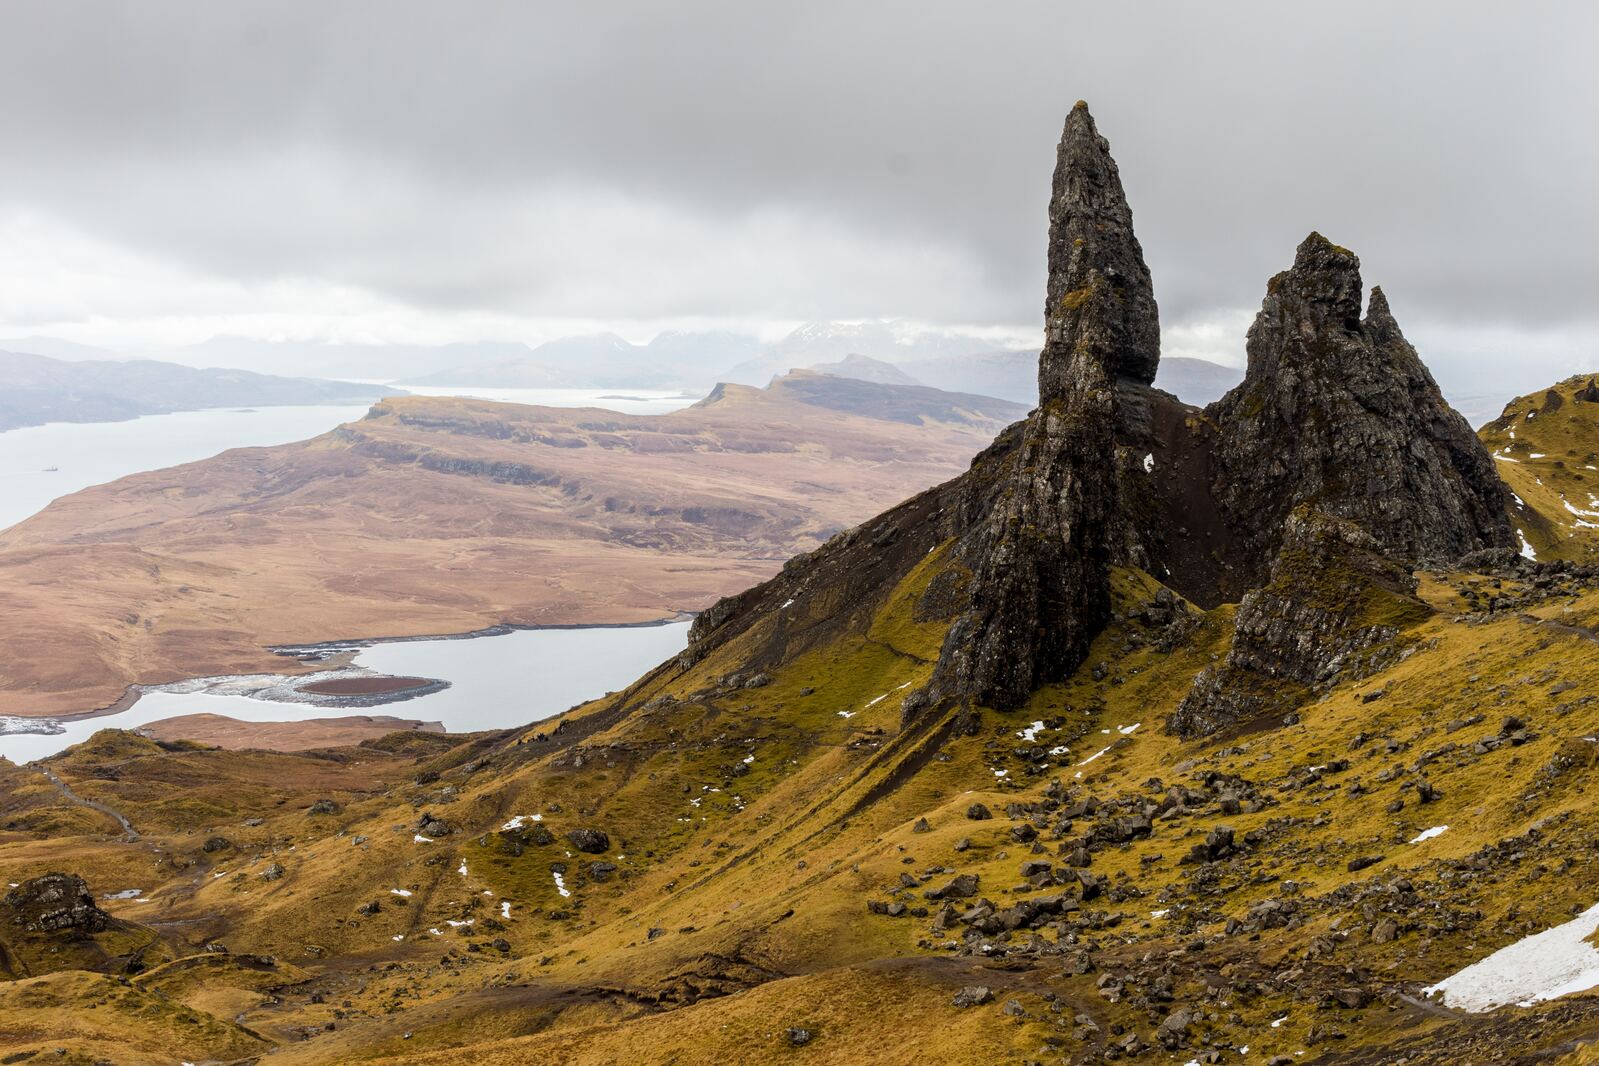 Image of The Old Man of Storr by Team PhotoHound